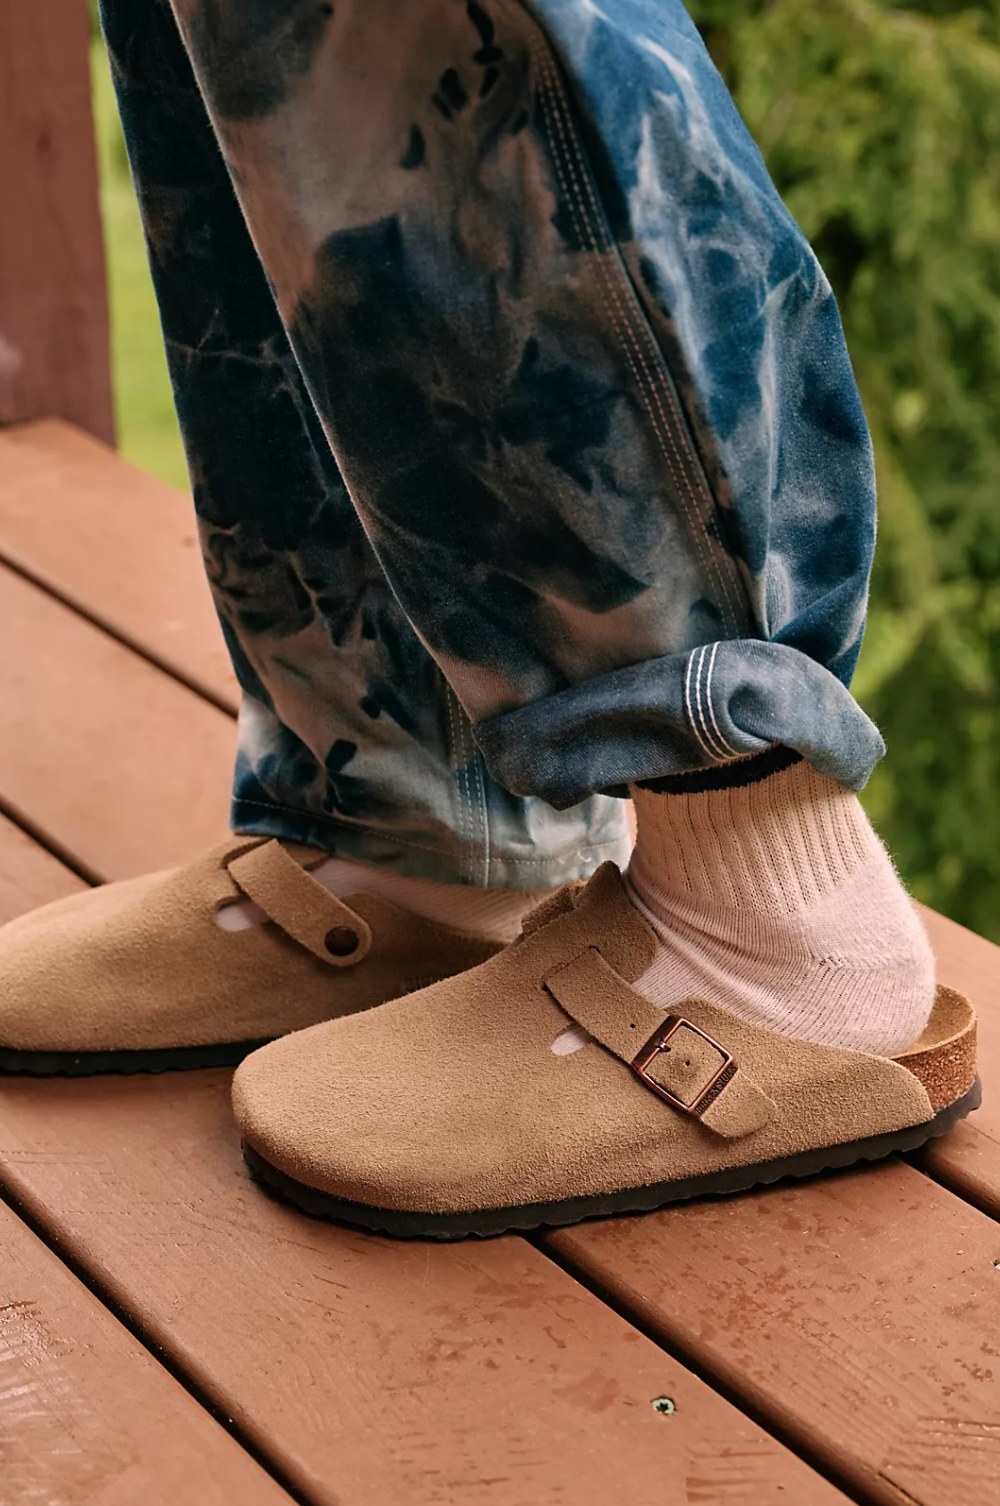 model wearing the tan birkenstocks with white socks and blue patterned pants on a wooden deck